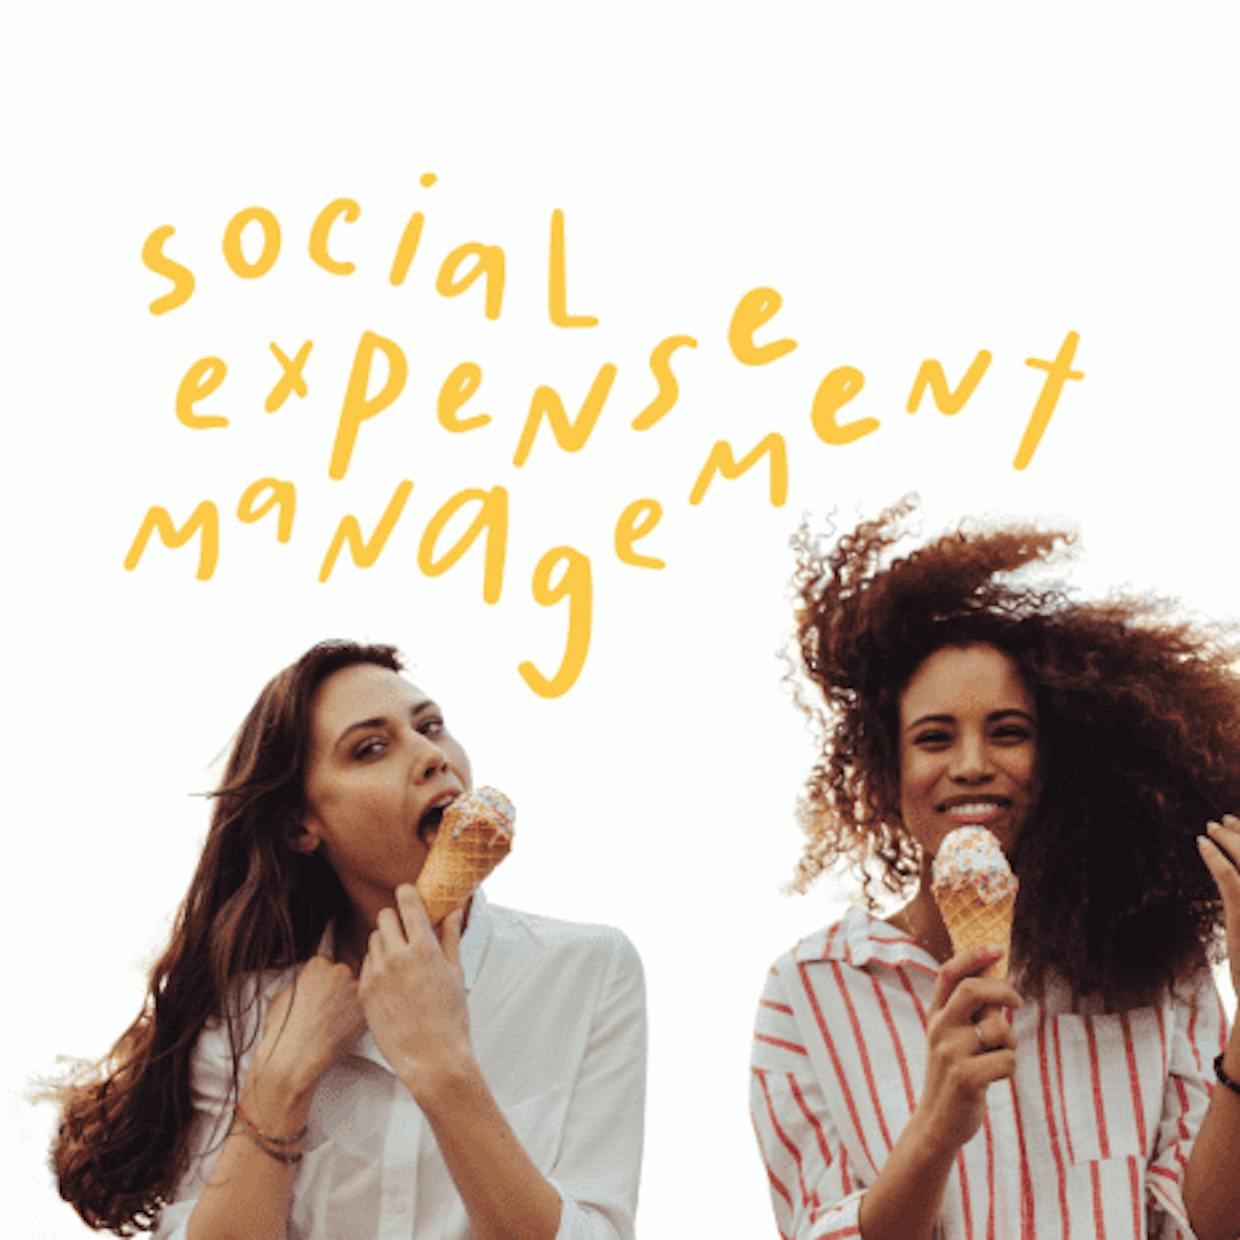 Social Expense Manager